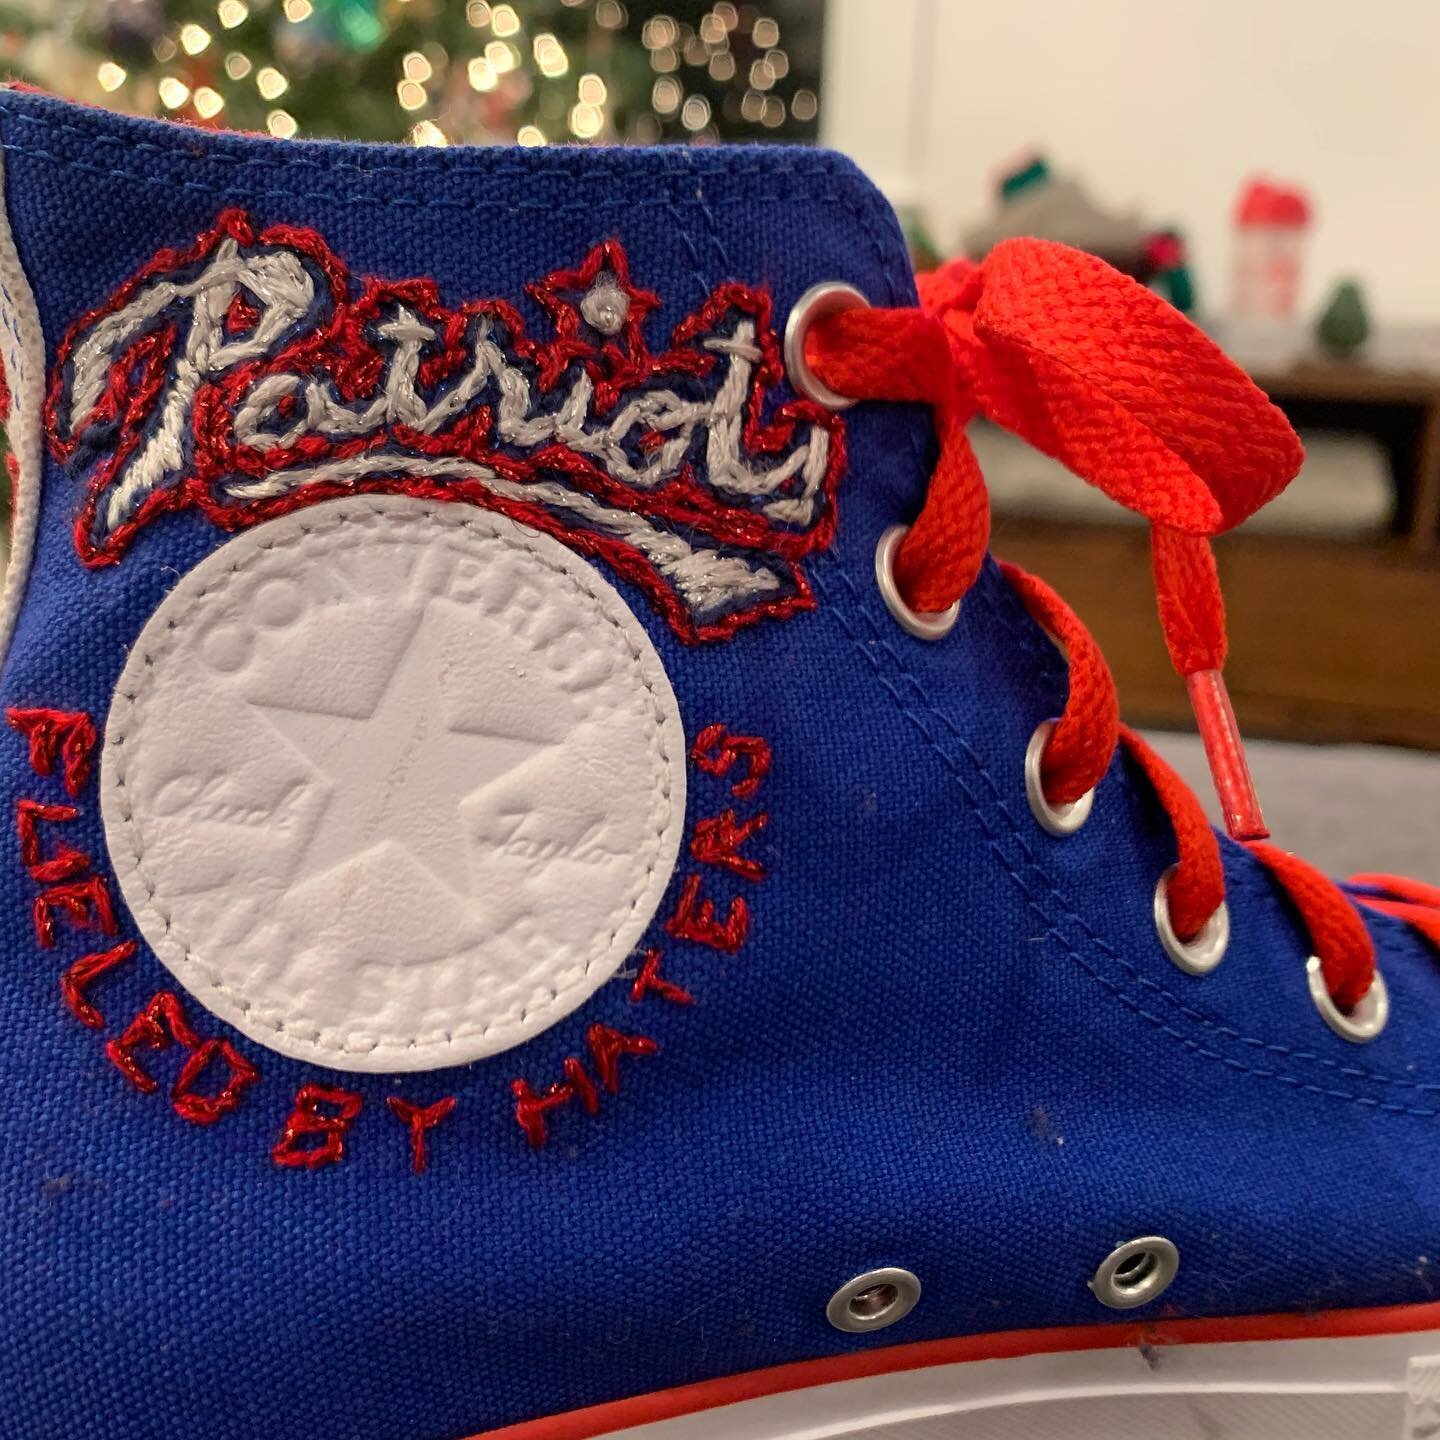 When you just know the perfect gift for your dear Patriots loving friend is a pair of hand embroidered converse sneakers you have to make them #customconverse #embroideredconverse #embroidery #covidhobbies #patriotsfan #newenglandpatriots #newengland